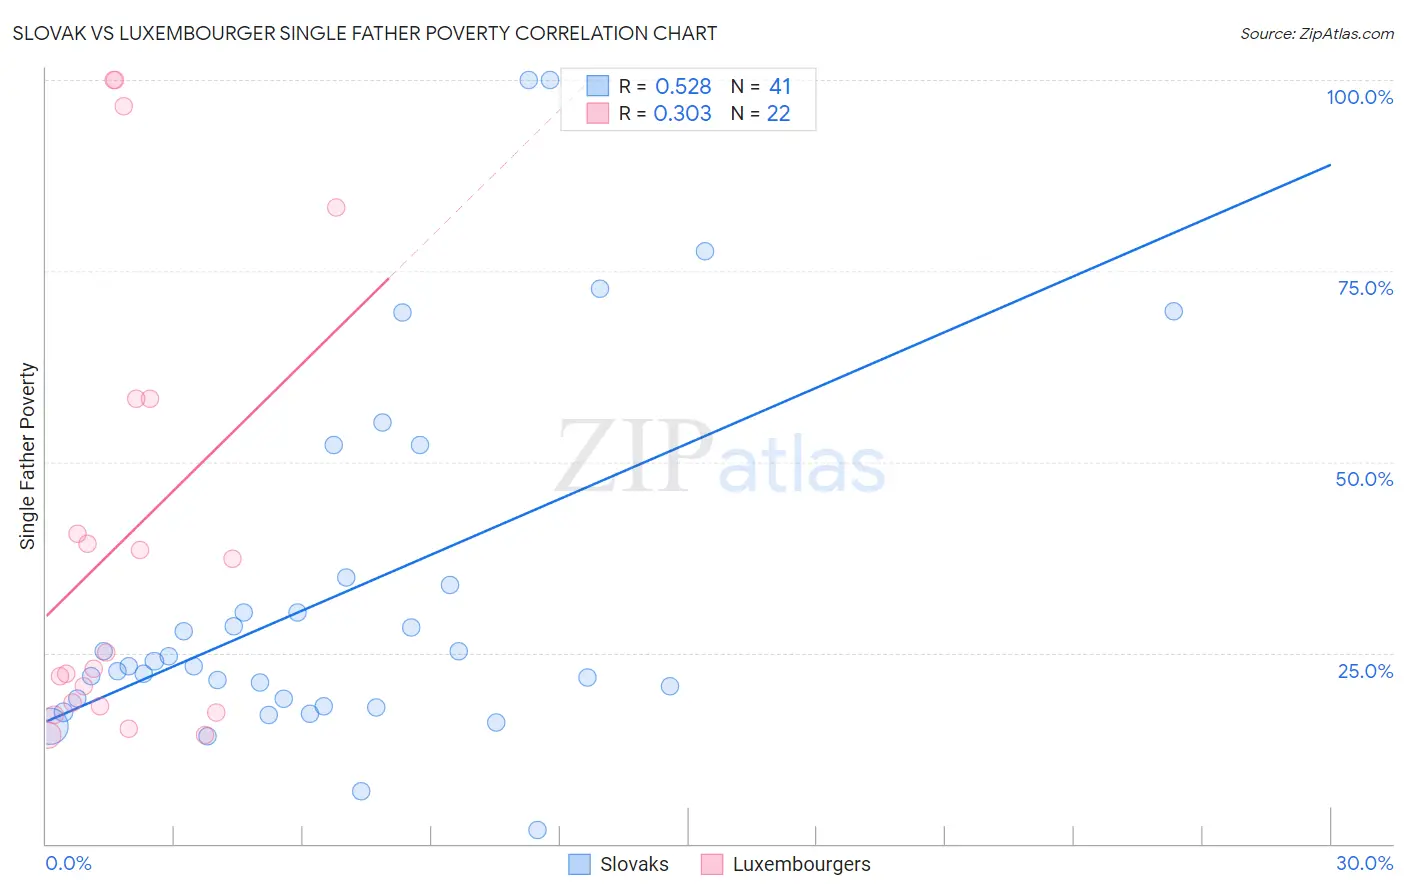 Slovak vs Luxembourger Single Father Poverty